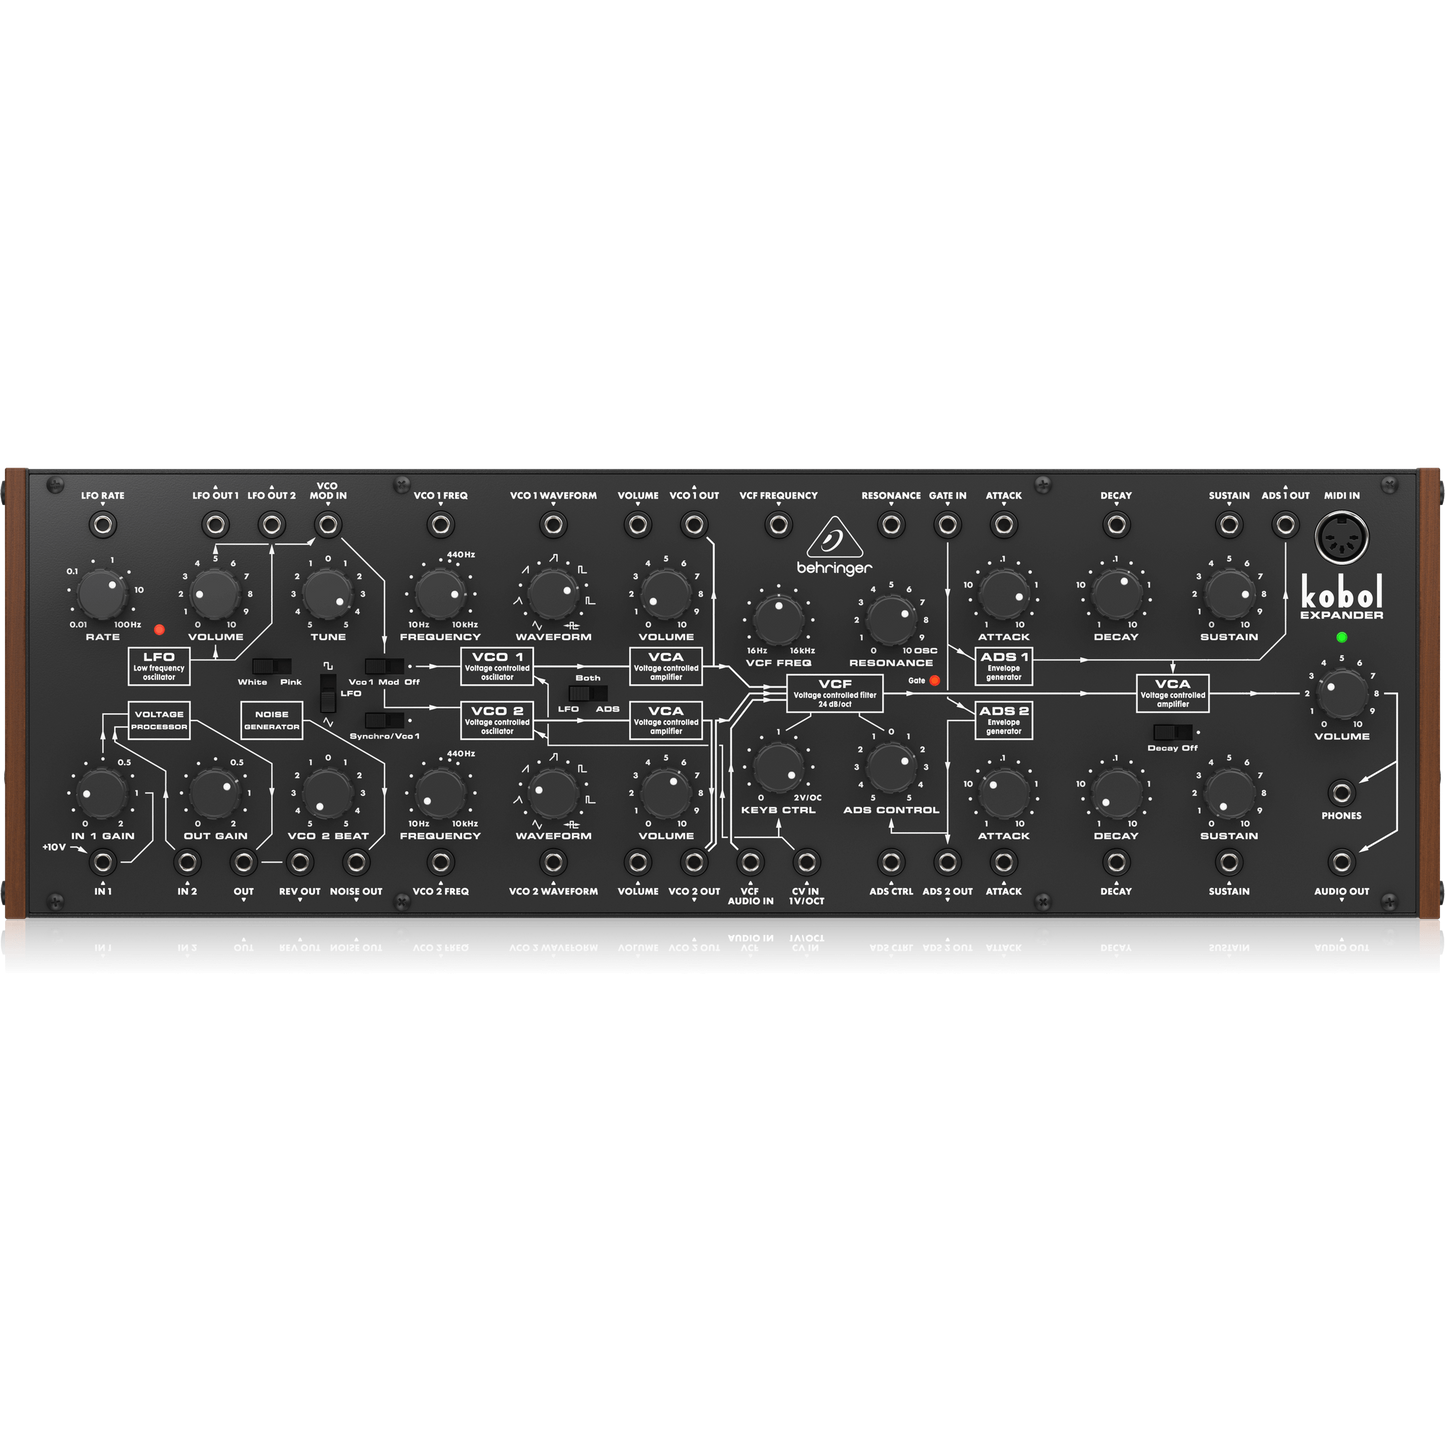 Behringer Kobol Expander Analog Semi-Modular Synthesizer with 2 VCOs Featuring 7 Variable Waveshapes and Unique Kobol VCF in Eurorack Format